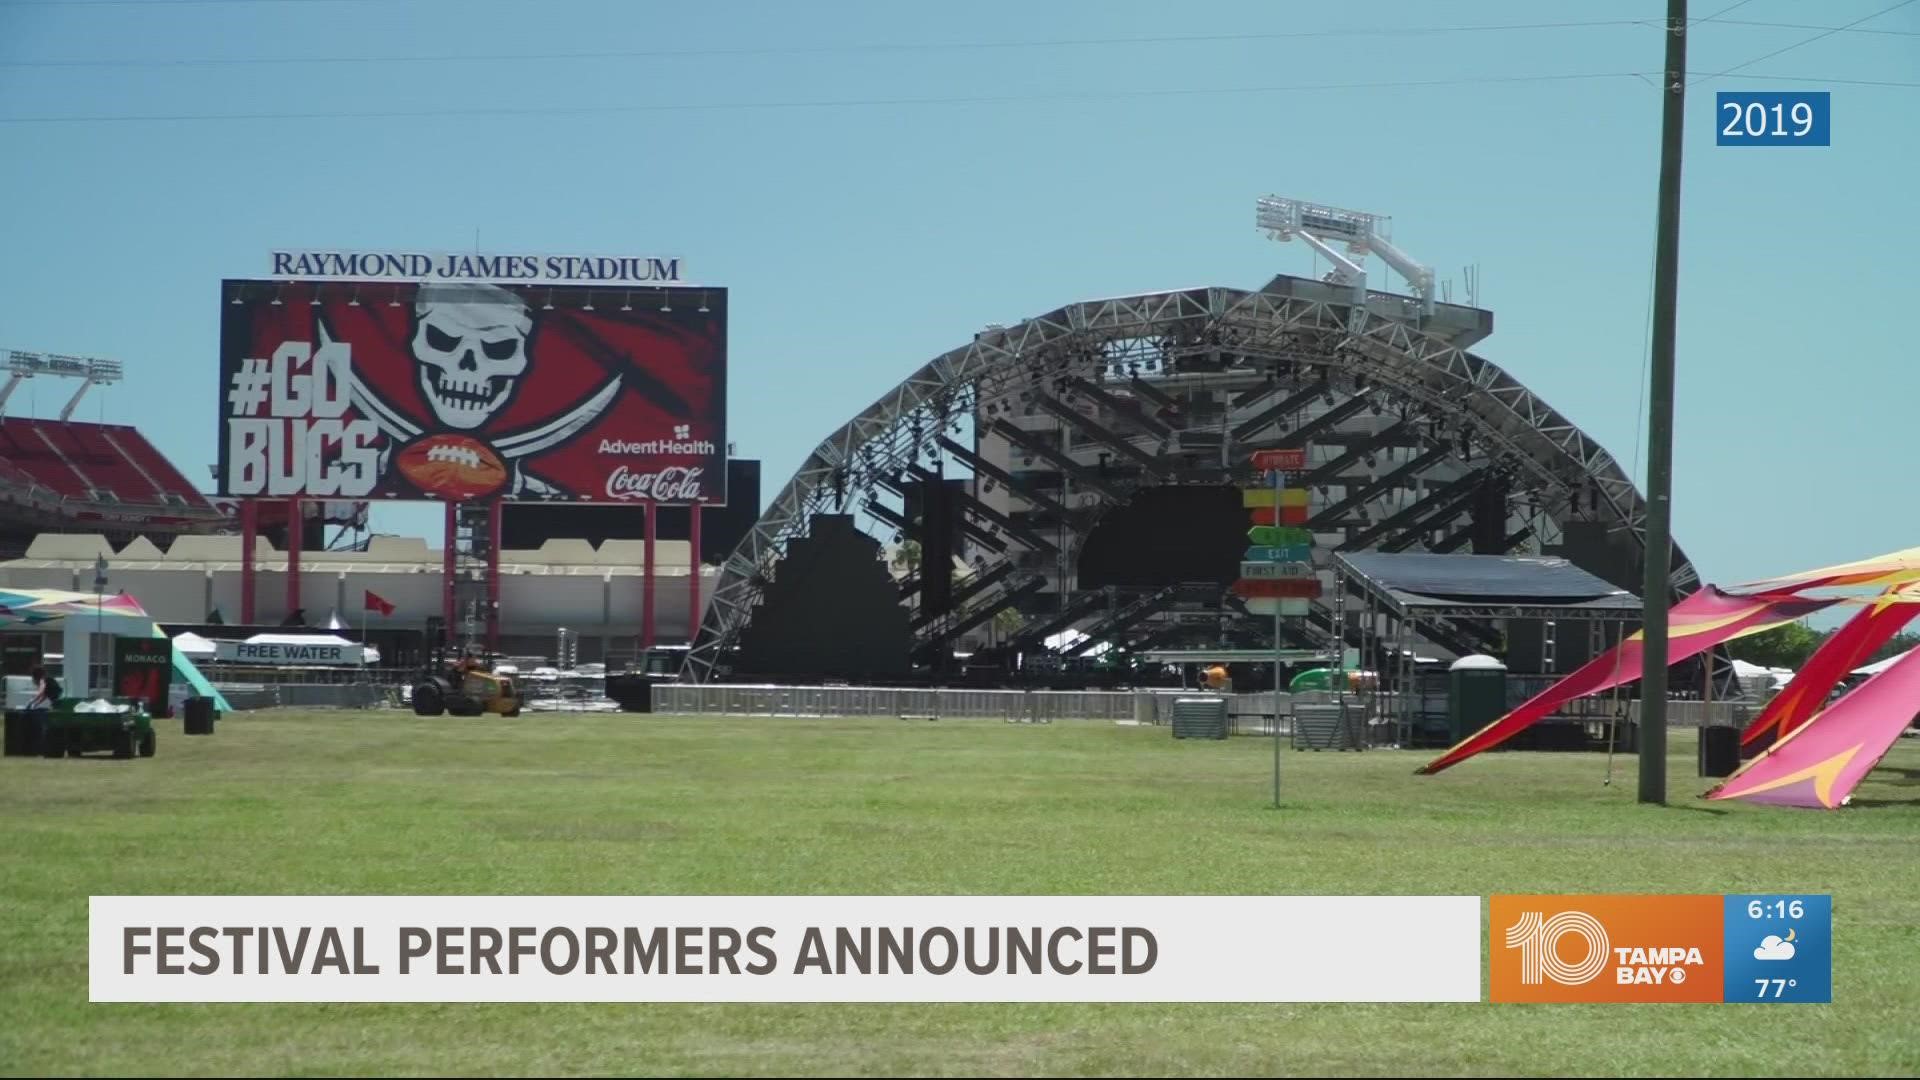 The 3-day festival is set for May 27-29 in the front lot of Raymond James Stadium.